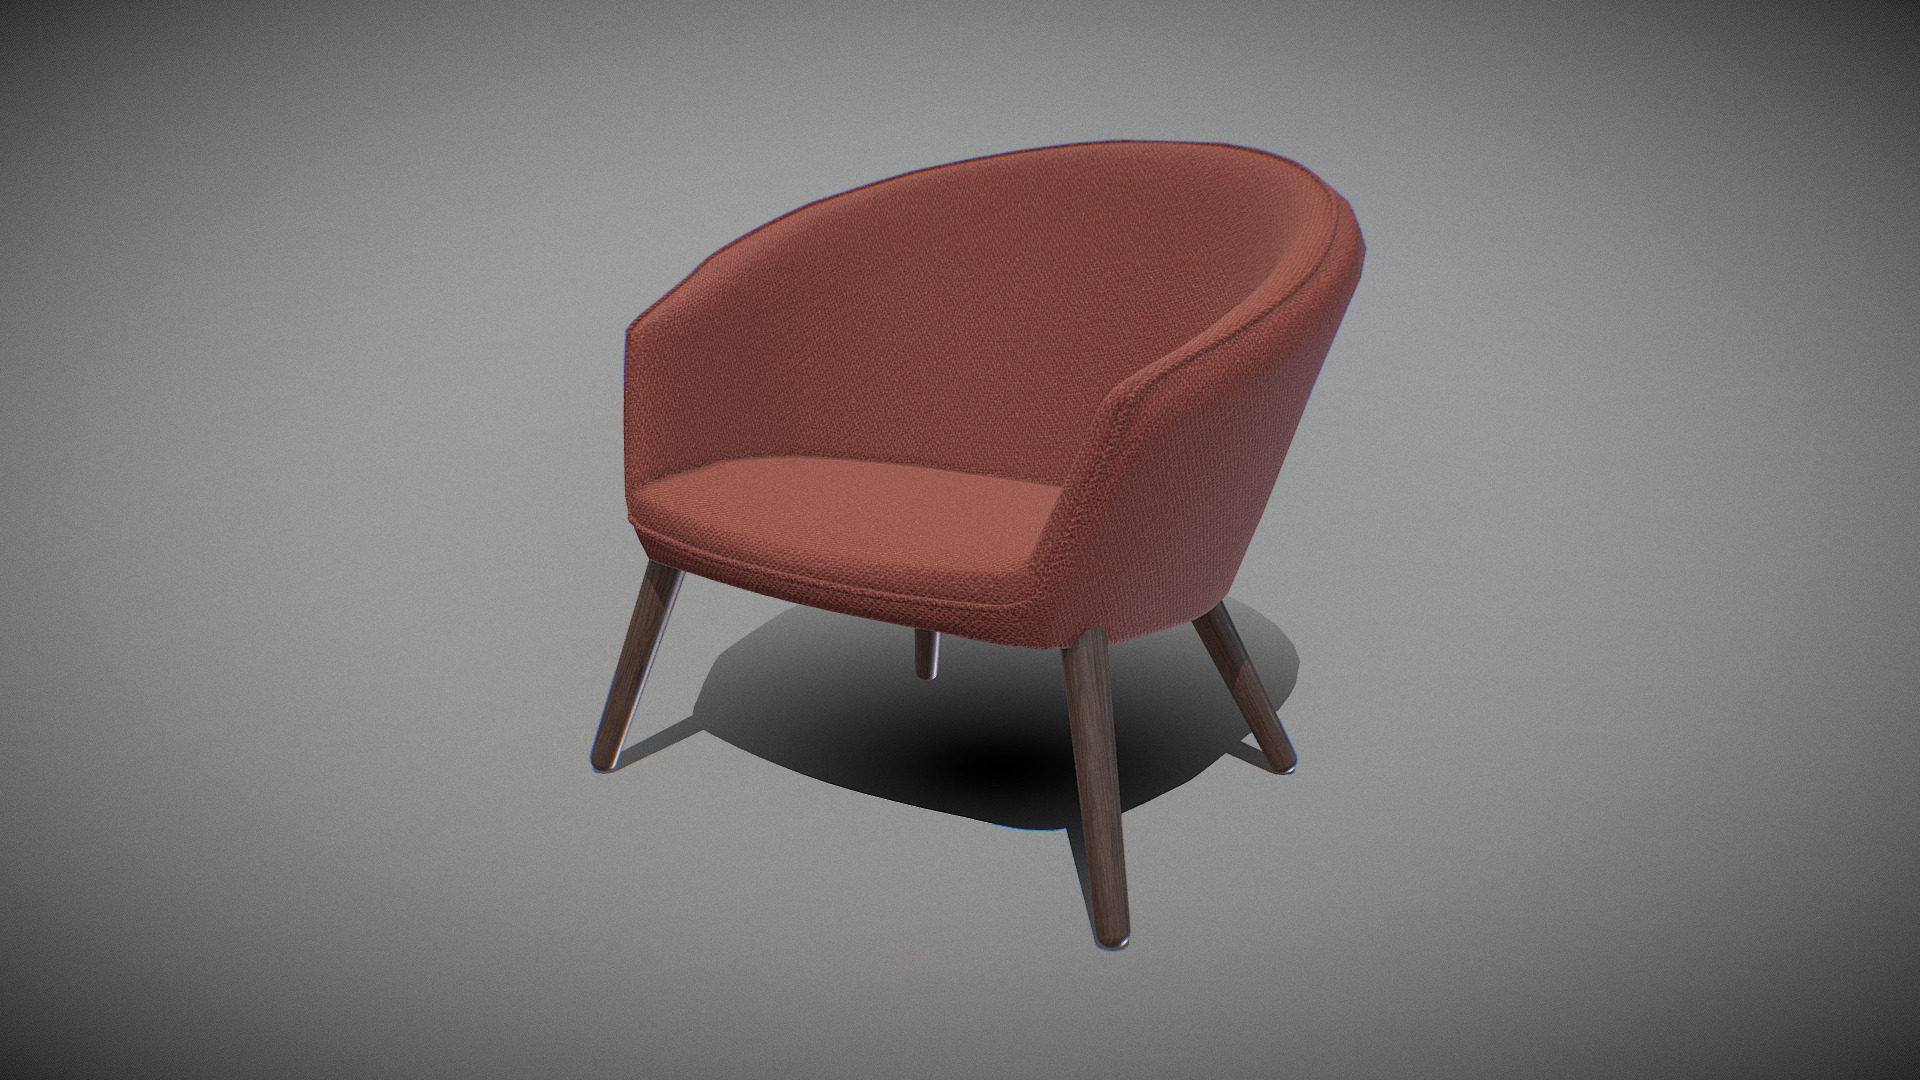 3D model Ditzel Lounge Chair-fabric red - This is a 3D model of the Ditzel Lounge Chair-fabric red. The 3D model is about a red chair on a white background.